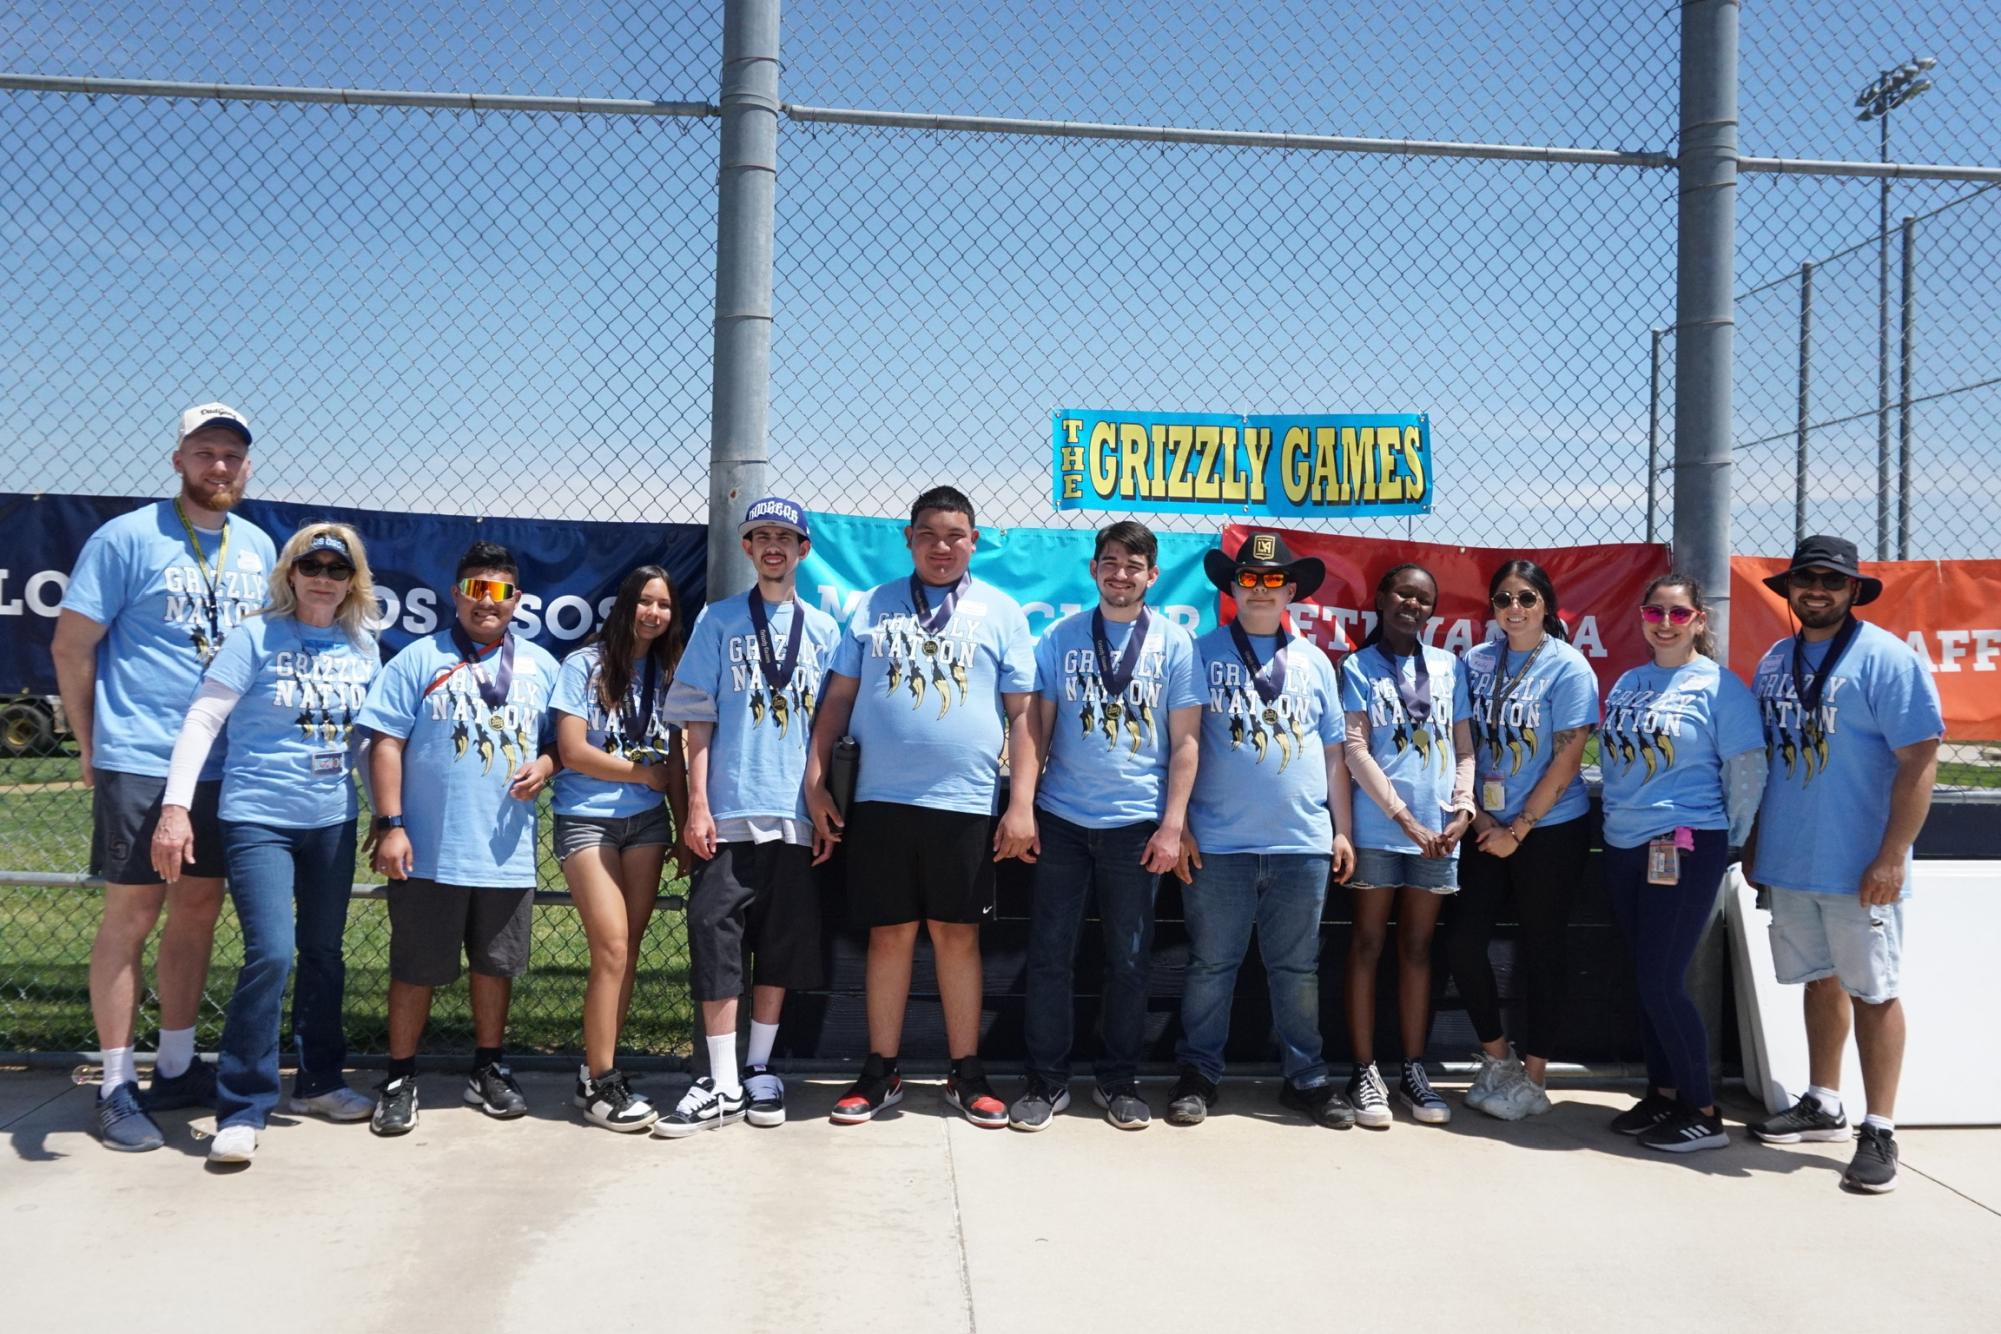 Los Osos High School’s 10th Annual Grizzly Games Promote Inclusion and Friendship Through Sports